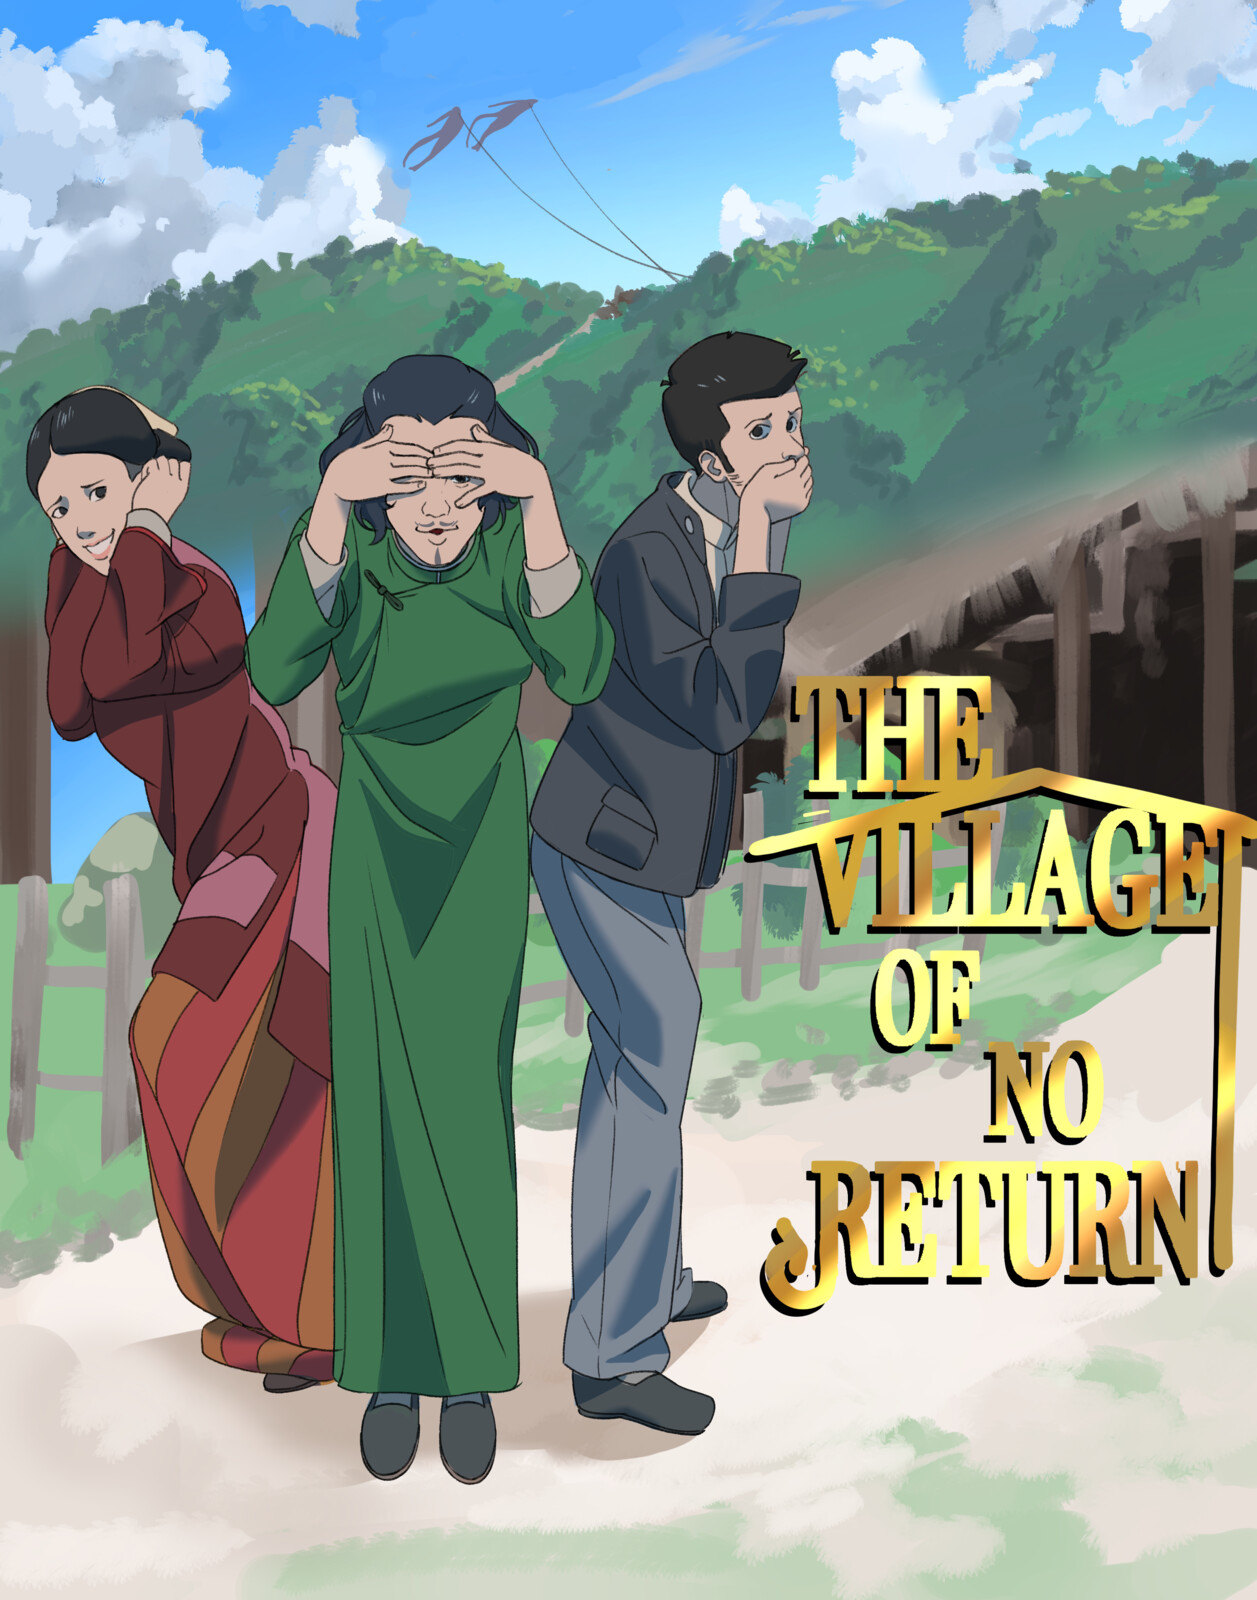 Animated reboot: The Village of no return promotional concept